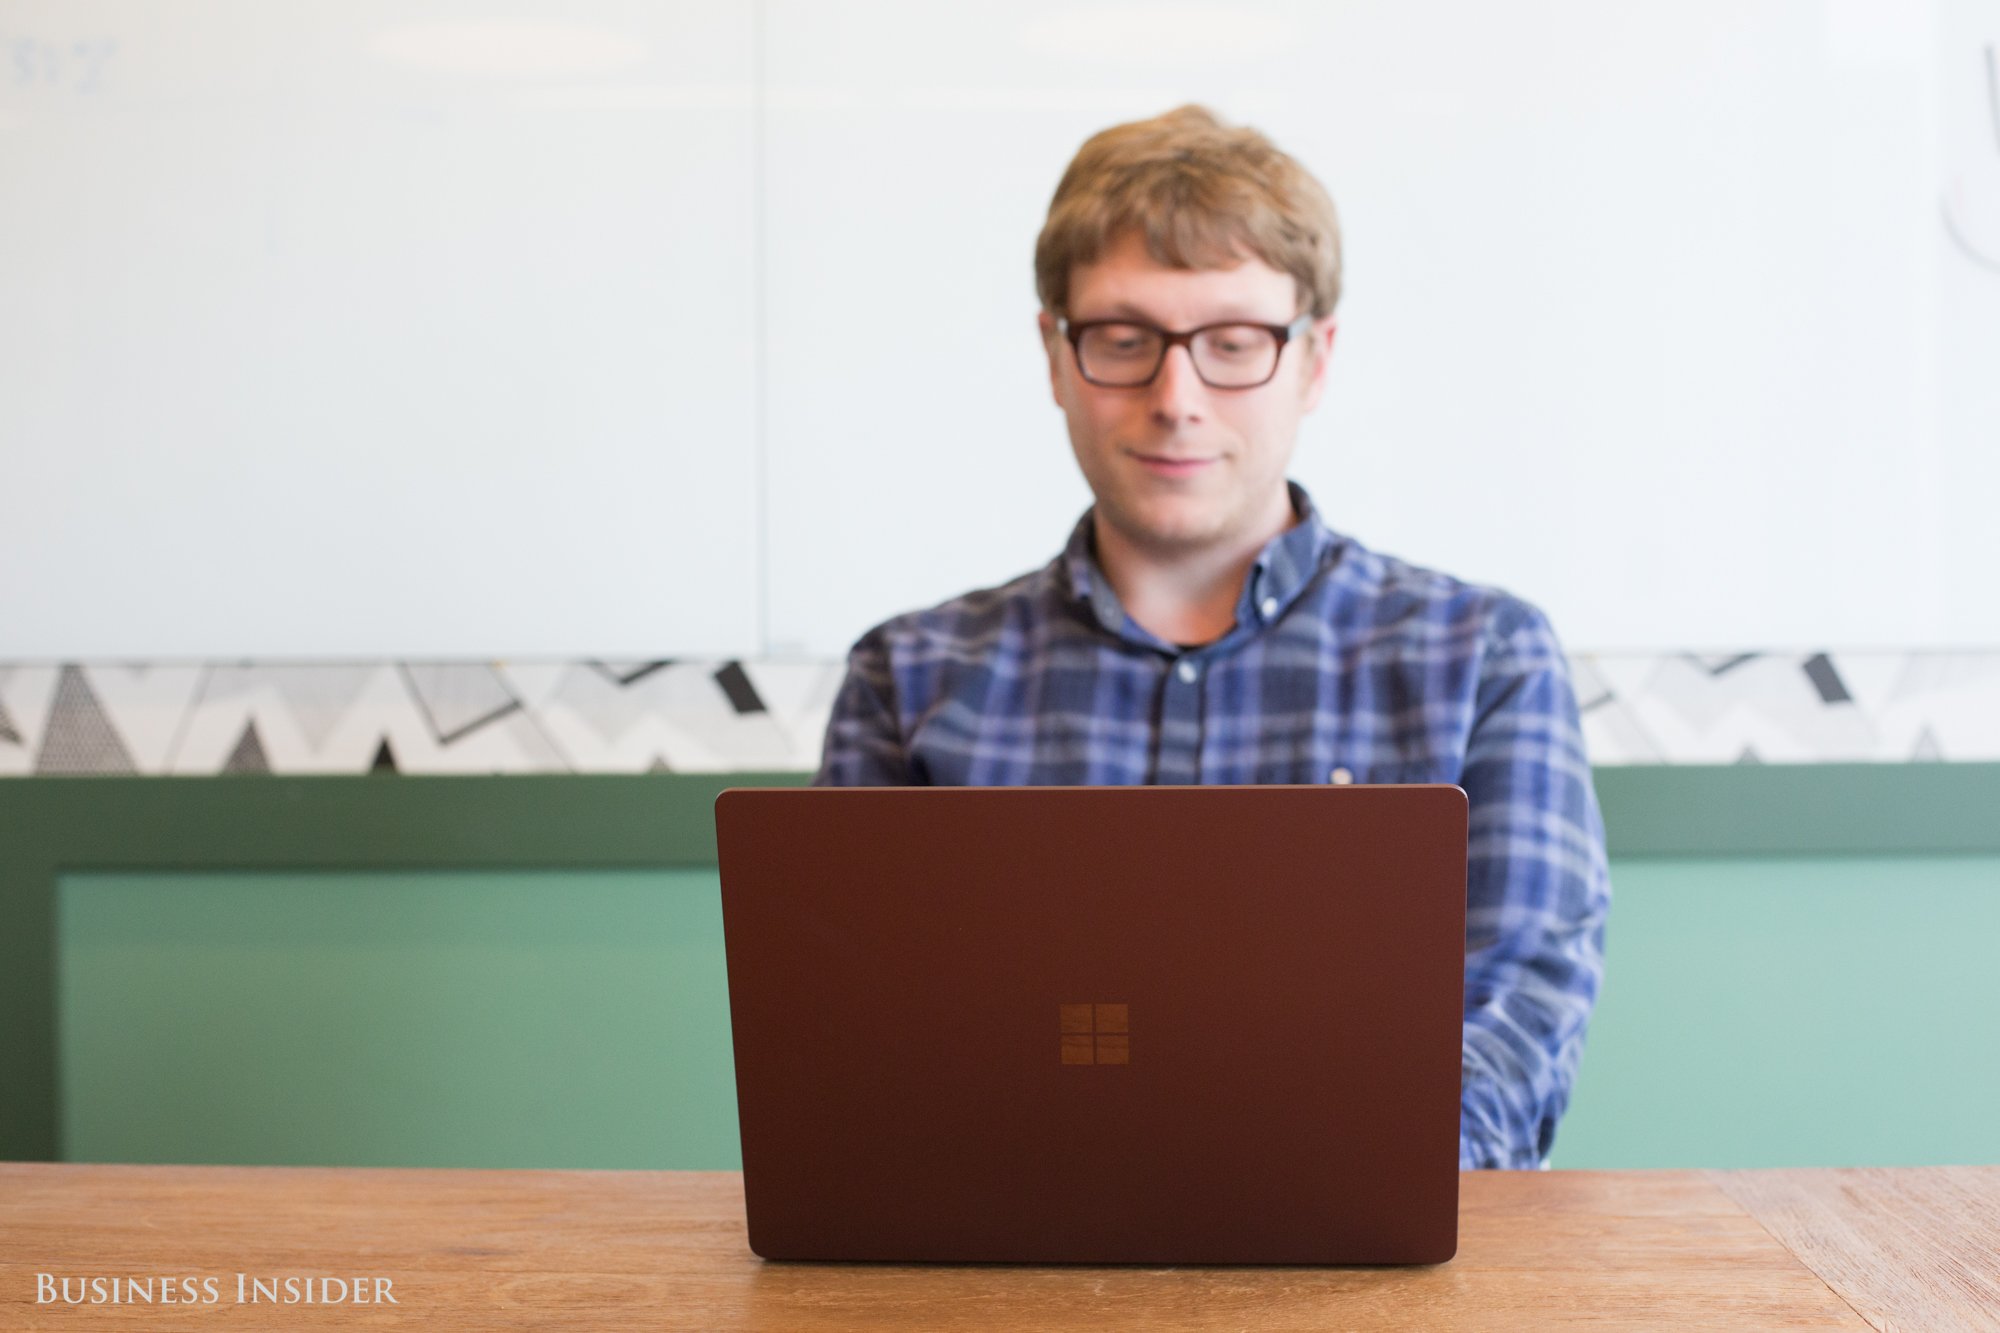 microsoft surface laptop review